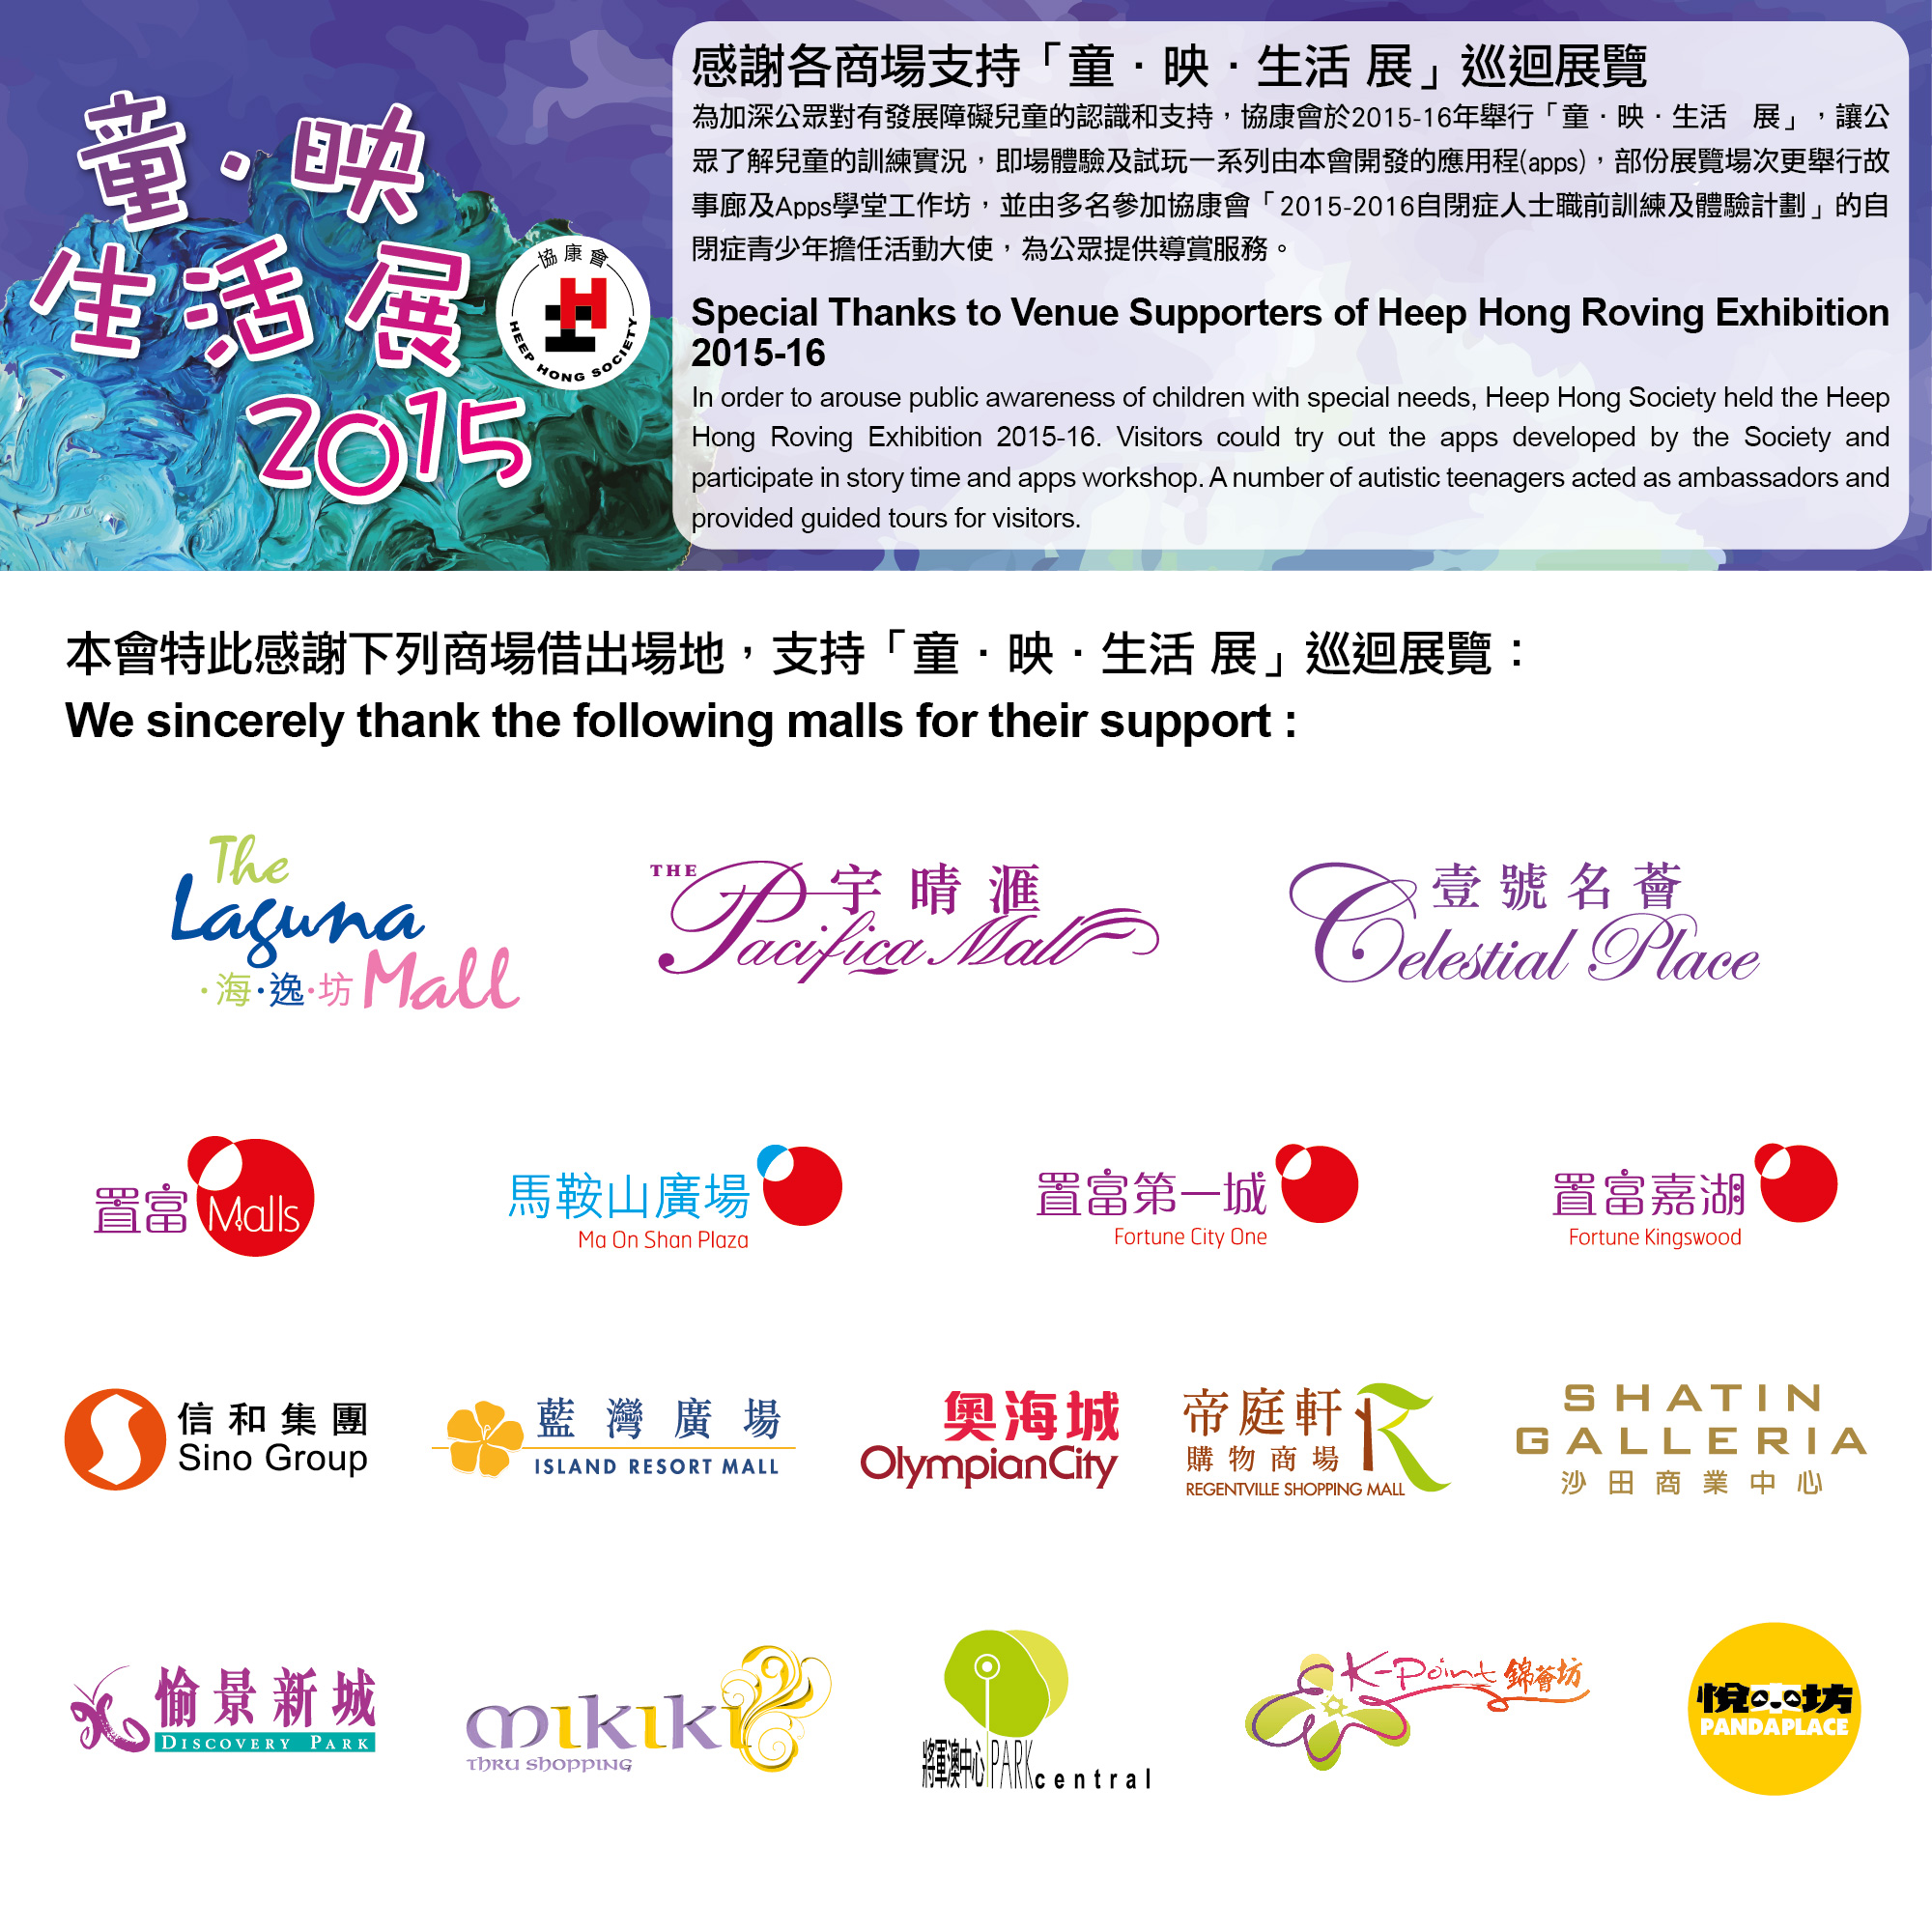 Heep Hong Roving Exhibition 2015-16 was a success. Thank you to all venue supporters.